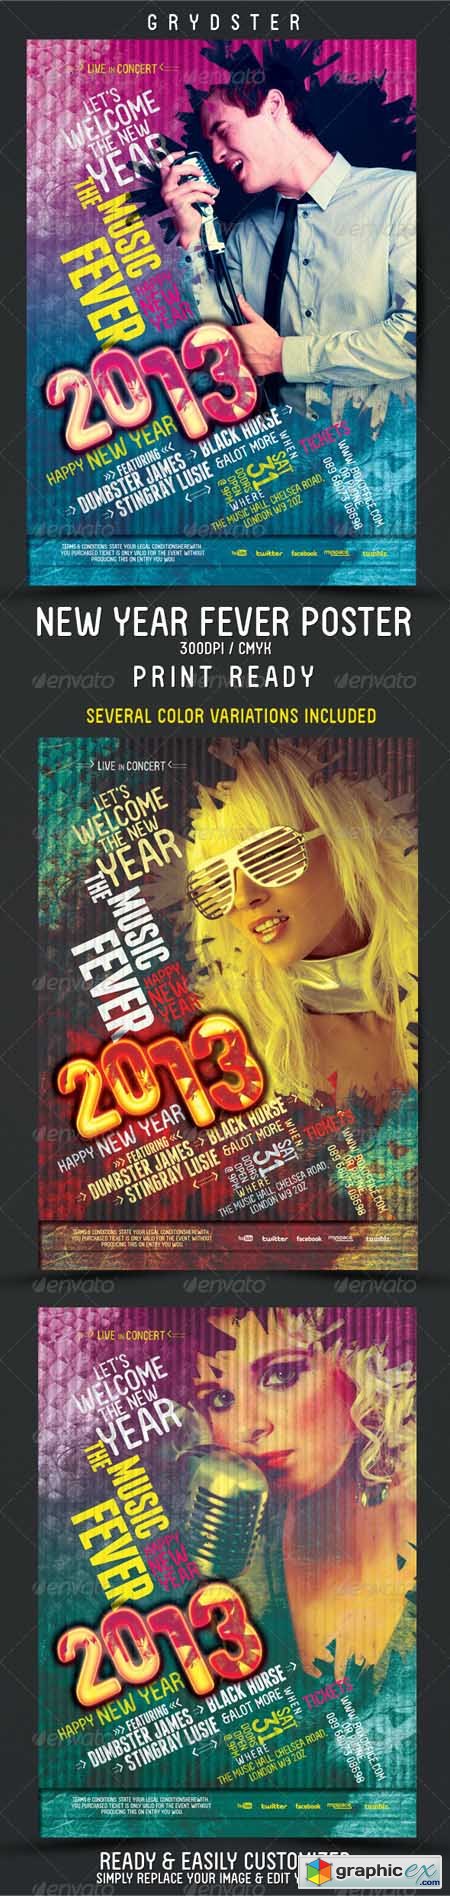 New Year Fever Flyer - Poster 3548375